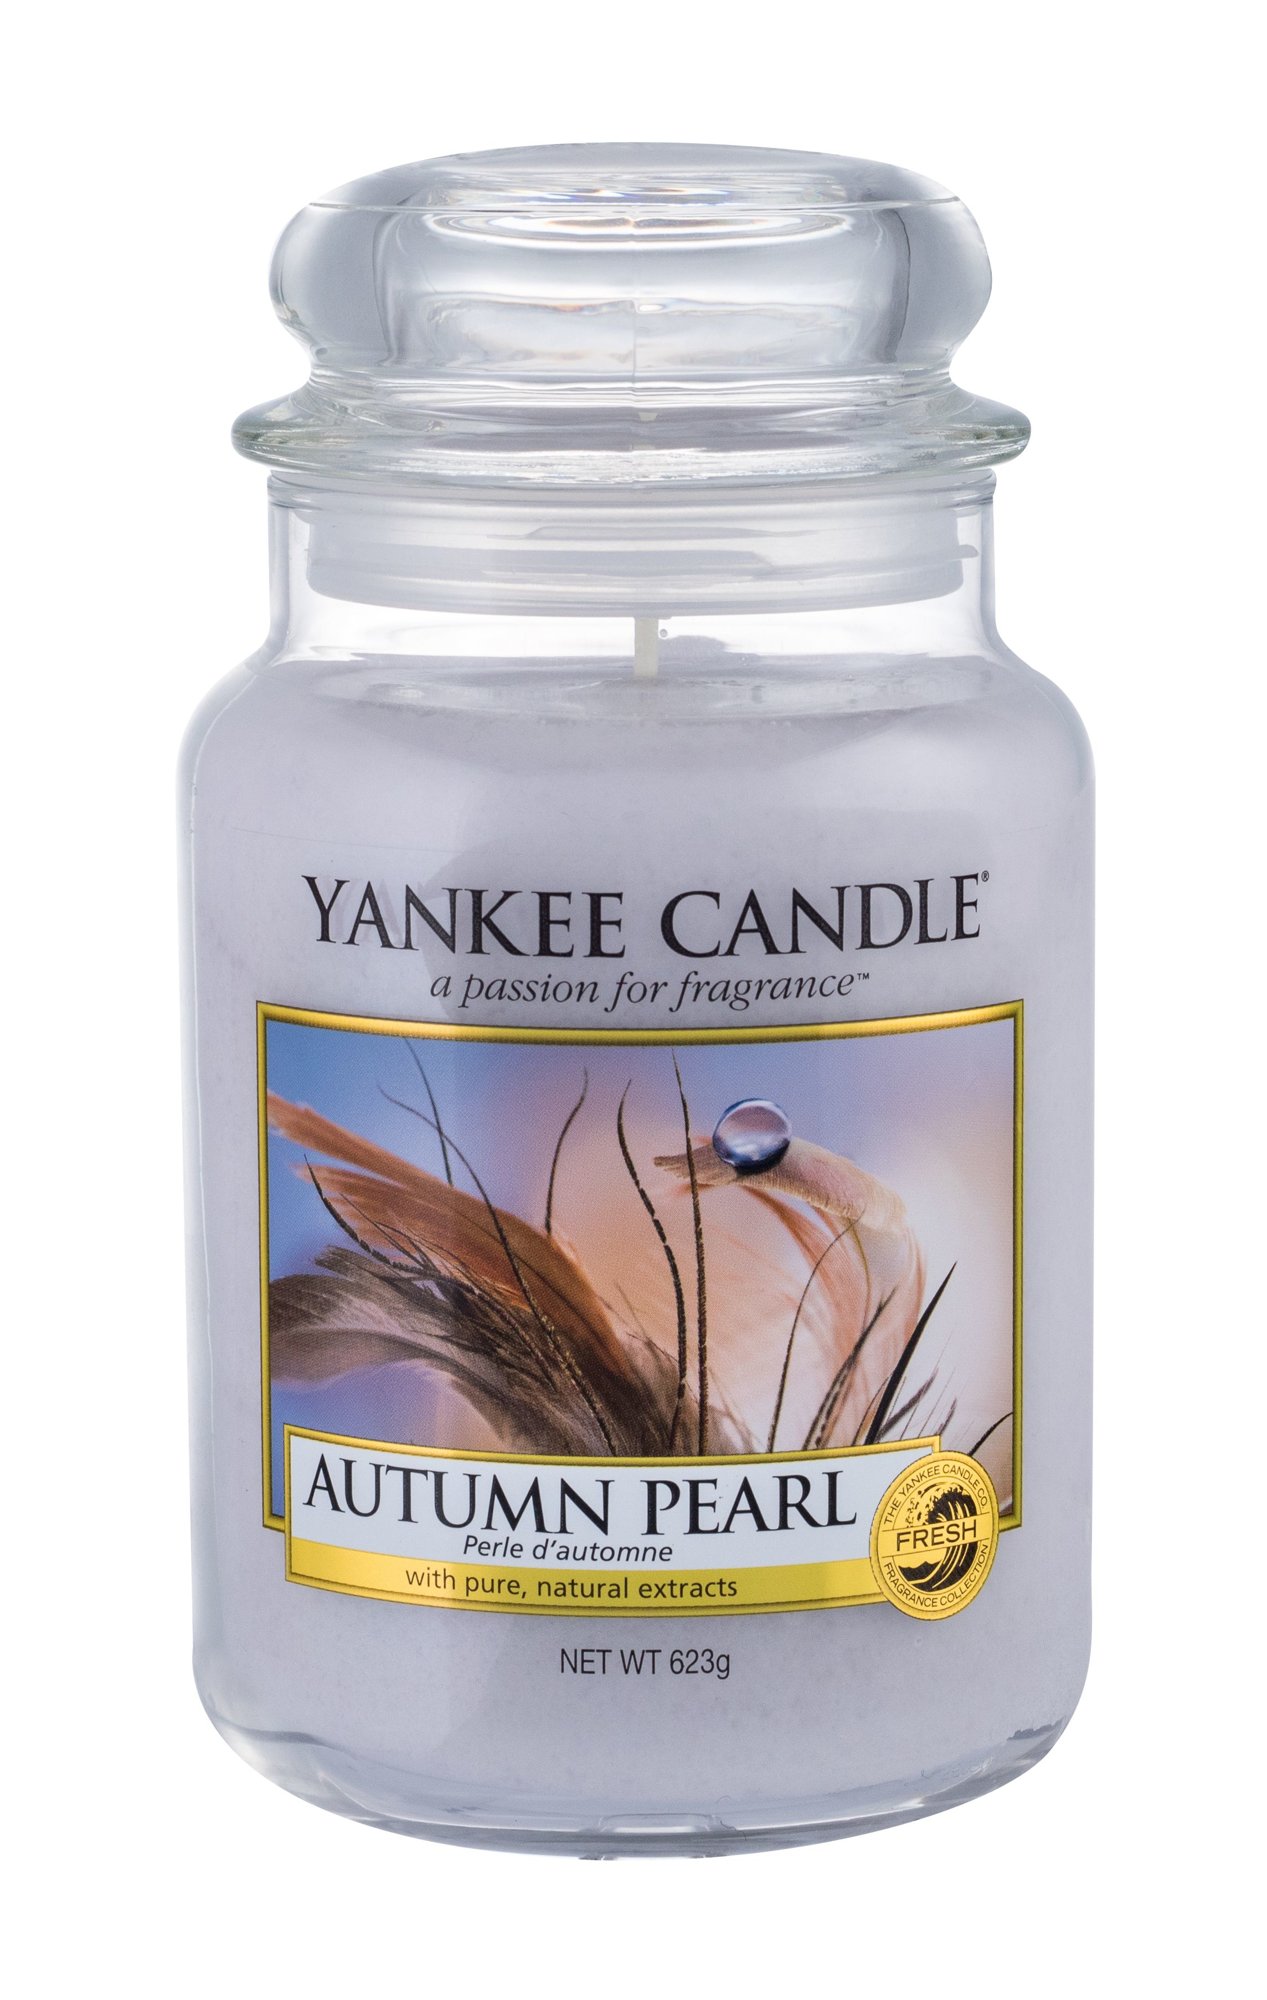 Yankee Candle Autumn Pearl 623g Kvepalai Unisex Scented Candle